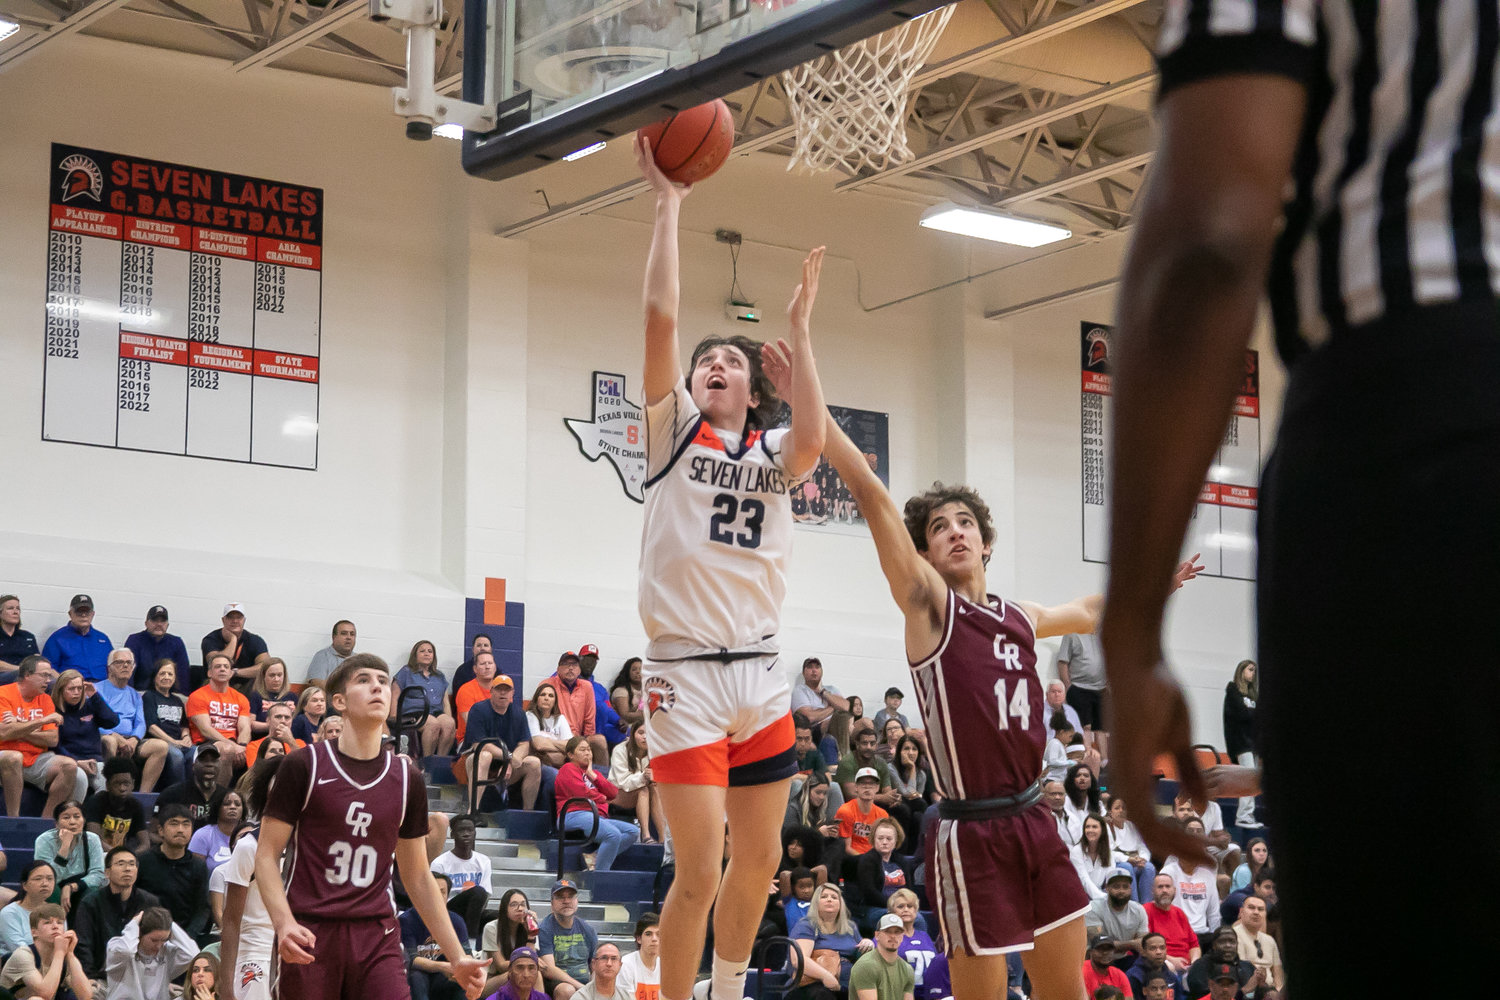 Brett Norton shoots a layup during Saturday's game between Seven Lakes and Cinco Ranch at the Seven Lakes gym.